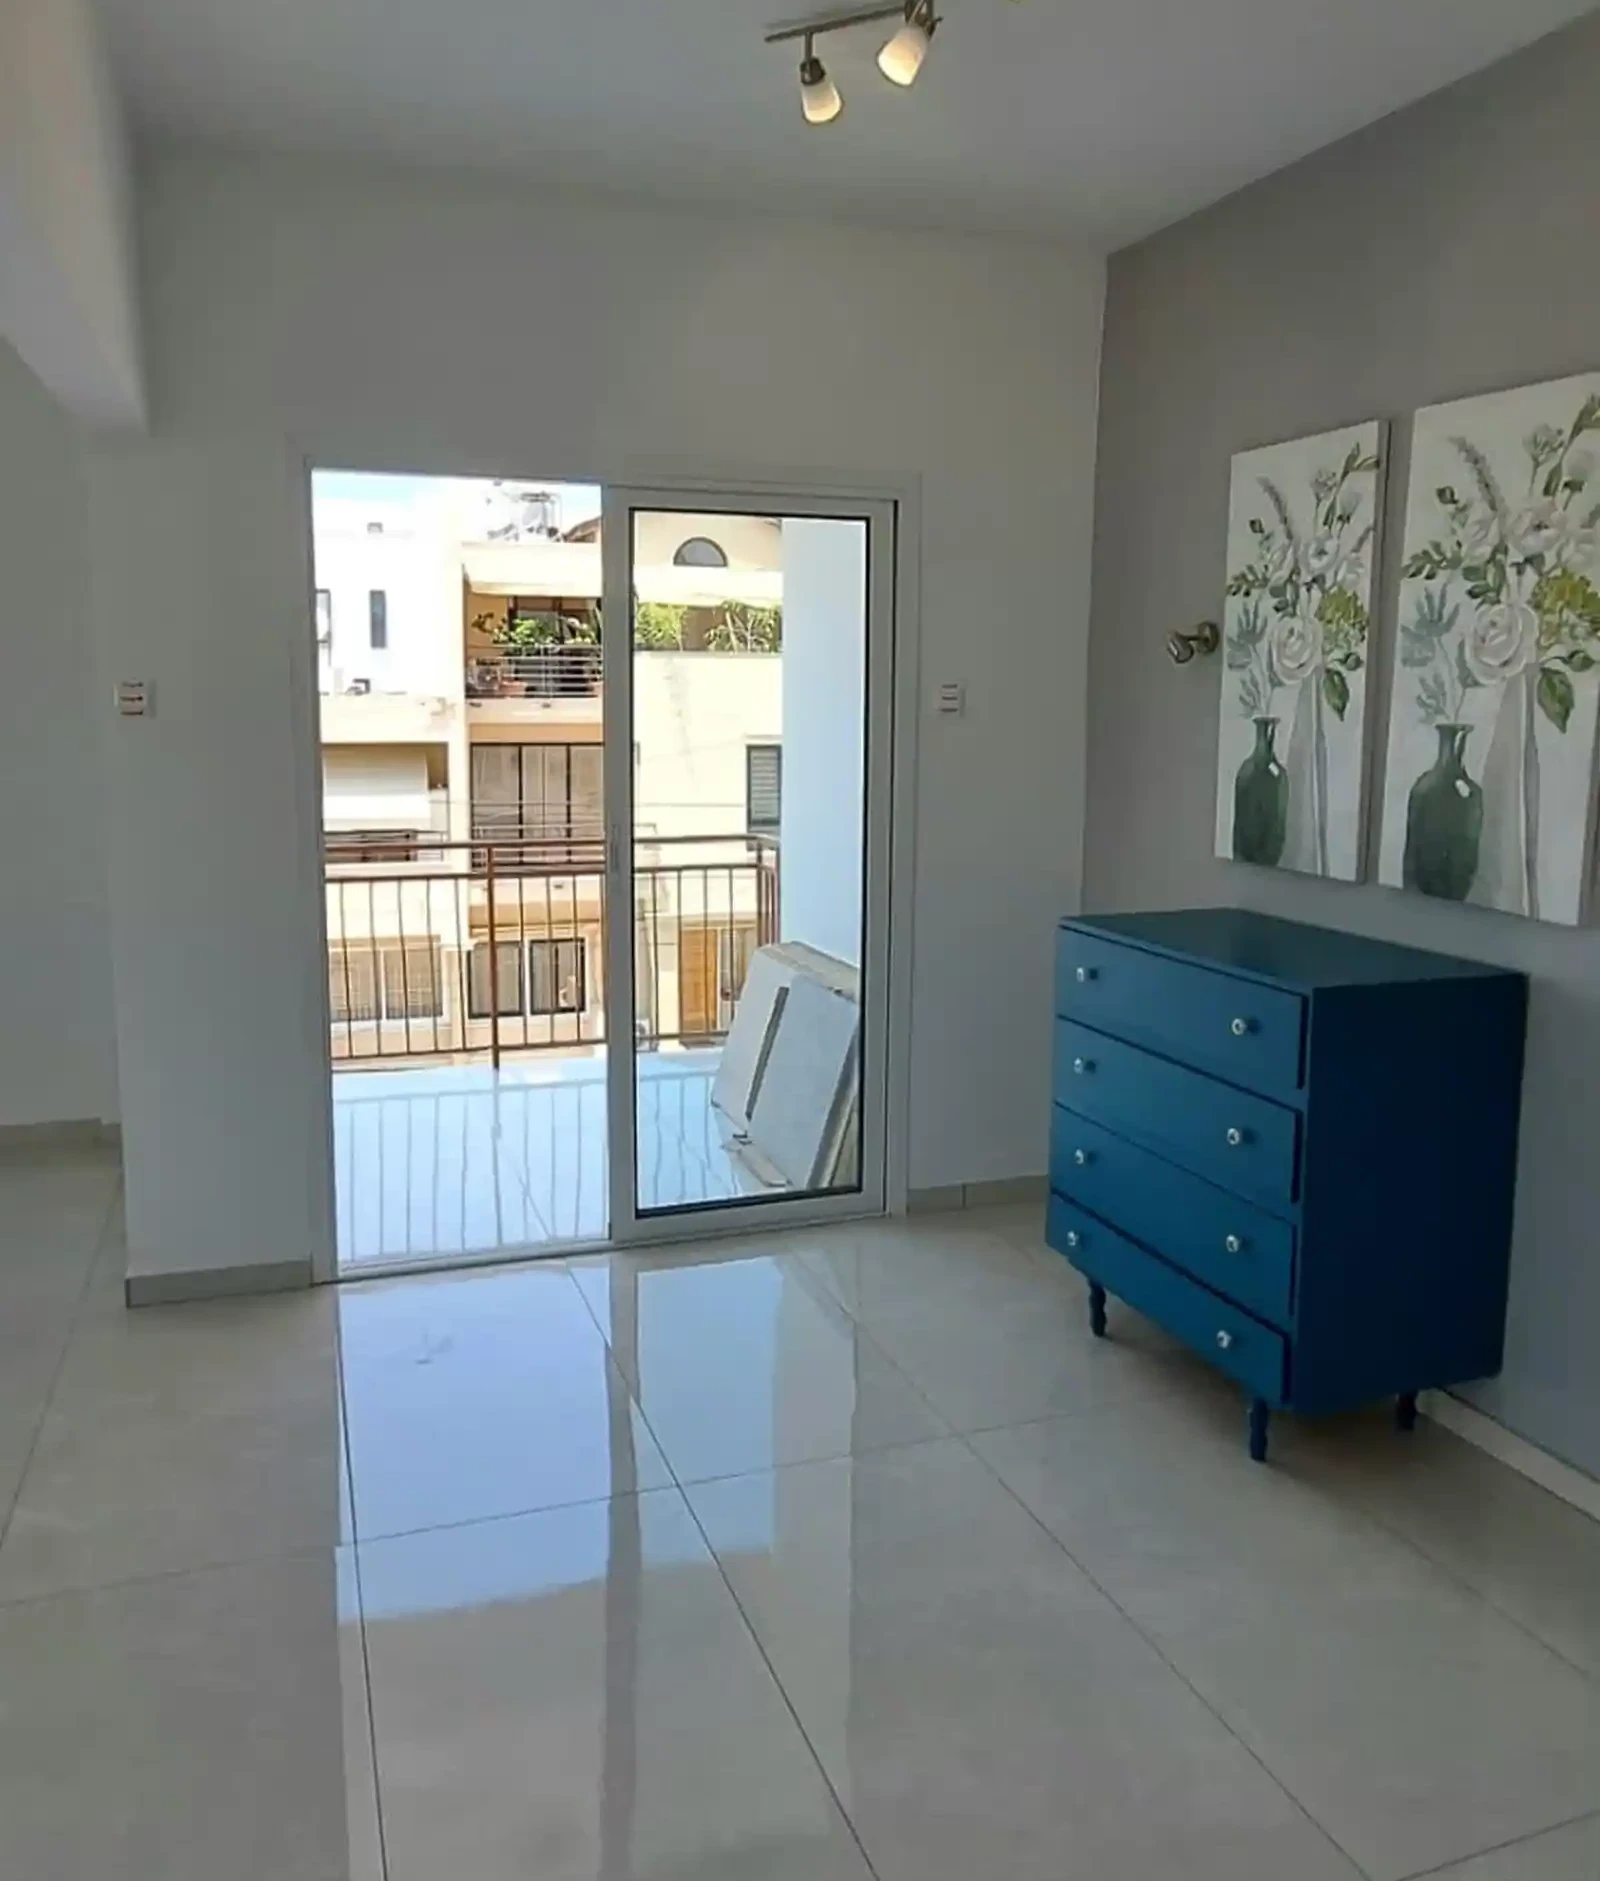 3-bedroom apartment fоr sаle €180.000, image 1